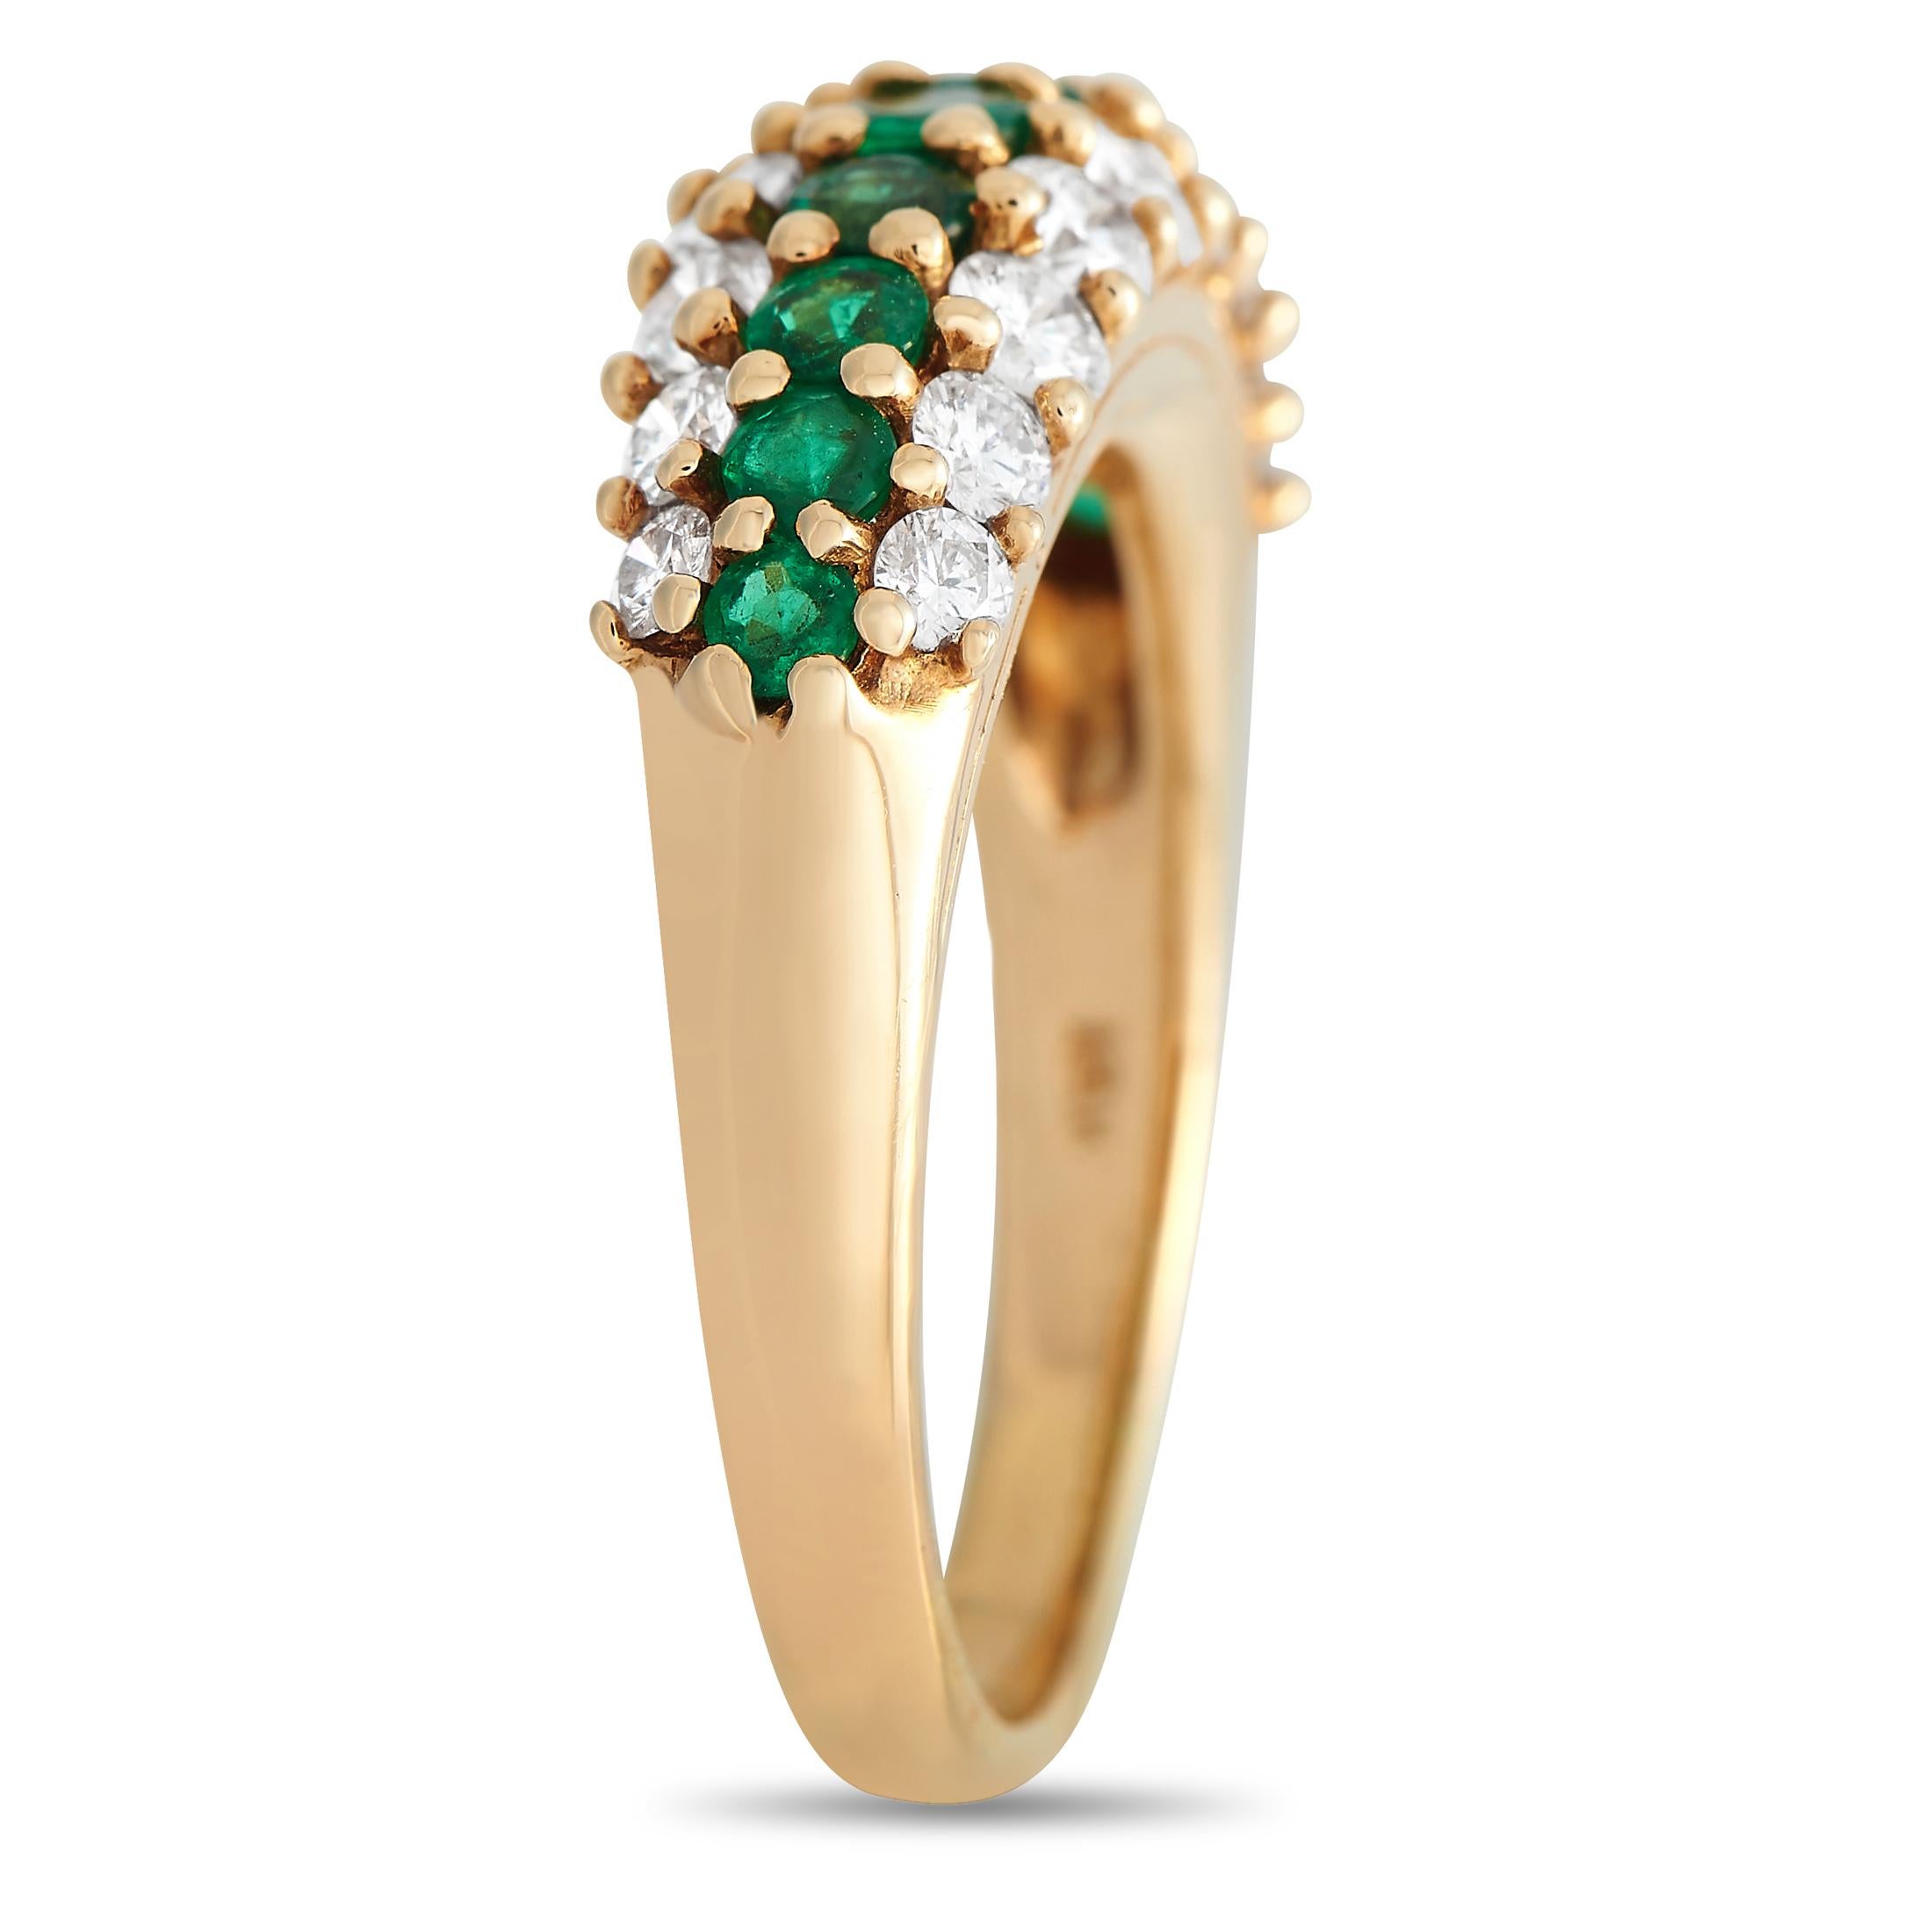 Everyone's eyes will be green with envy once they catch a glimpse of this glamorous piece from Tiffany & Co. This 18K yellow gold ring shimmers with three rows of precious gemstones. Sandwiched in between two borders of tapering diamonds is a row of